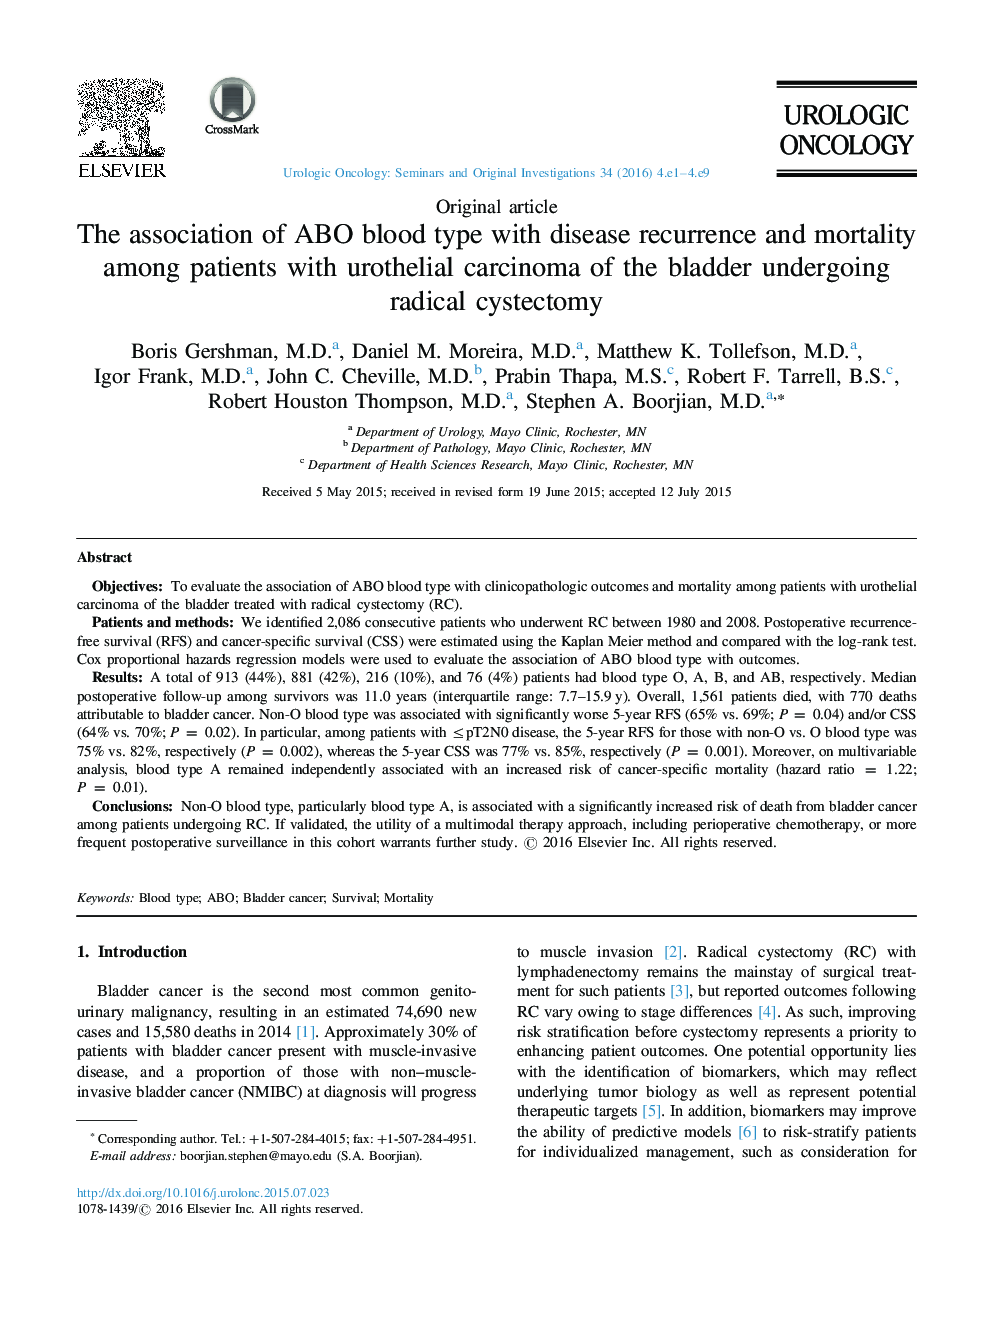 The association of ABO blood type with disease recurrence and mortality among patients with urothelial carcinoma of the bladder undergoing radical cystectomy